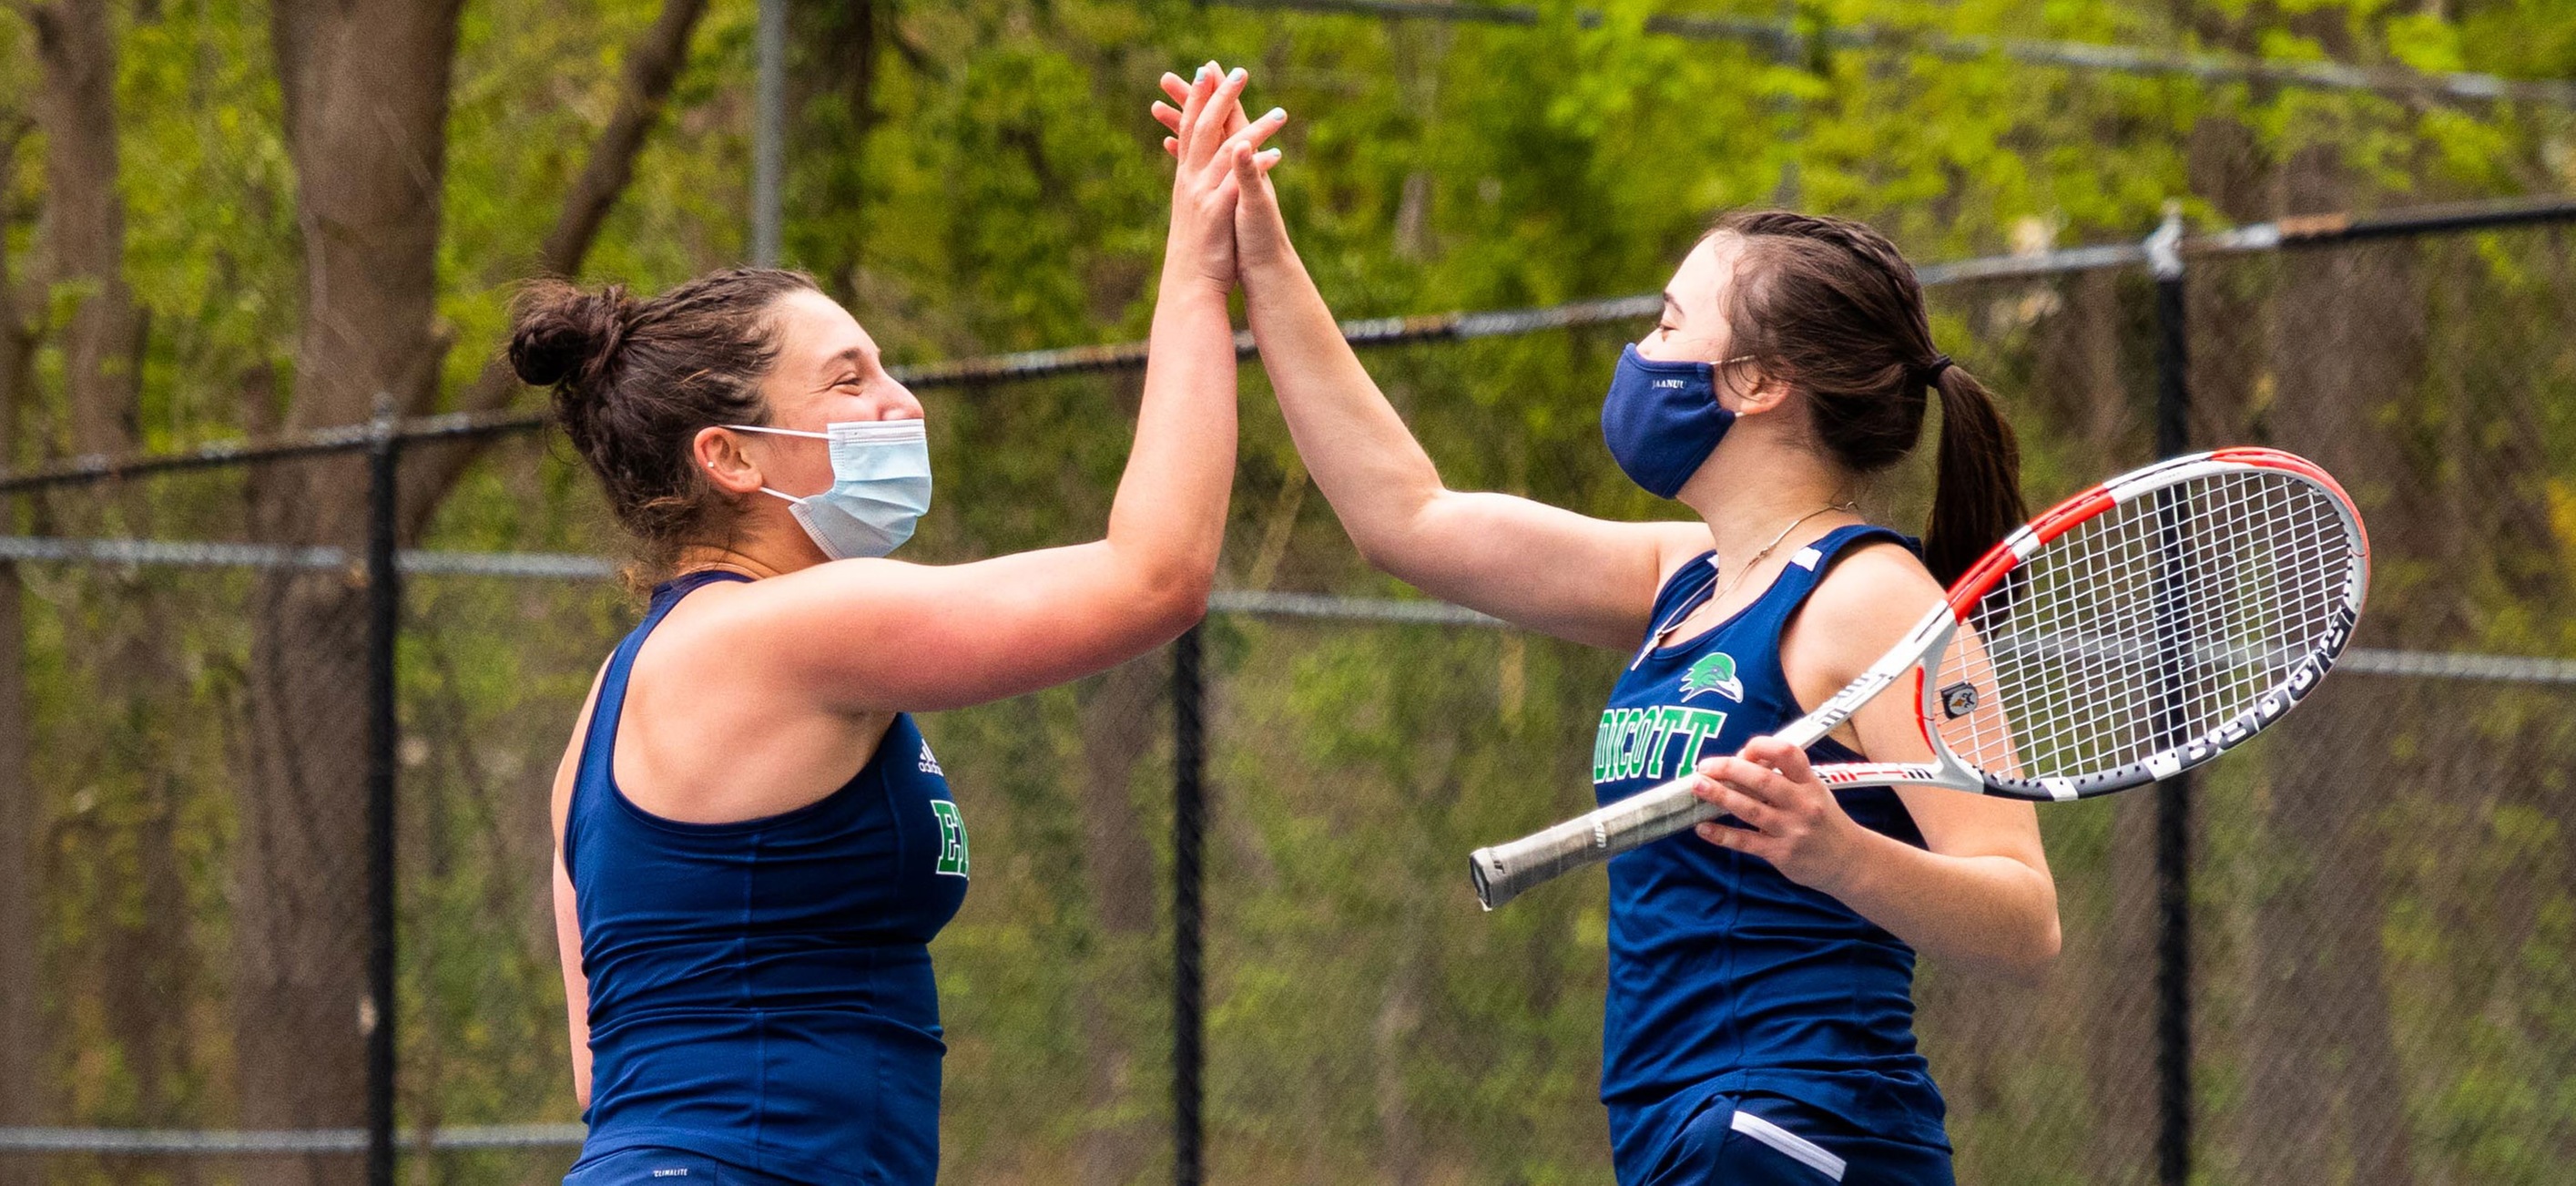 NCAA TOURNAMENT: Endicott, No. 11 Tufts Meet In Second Round (2 PM)